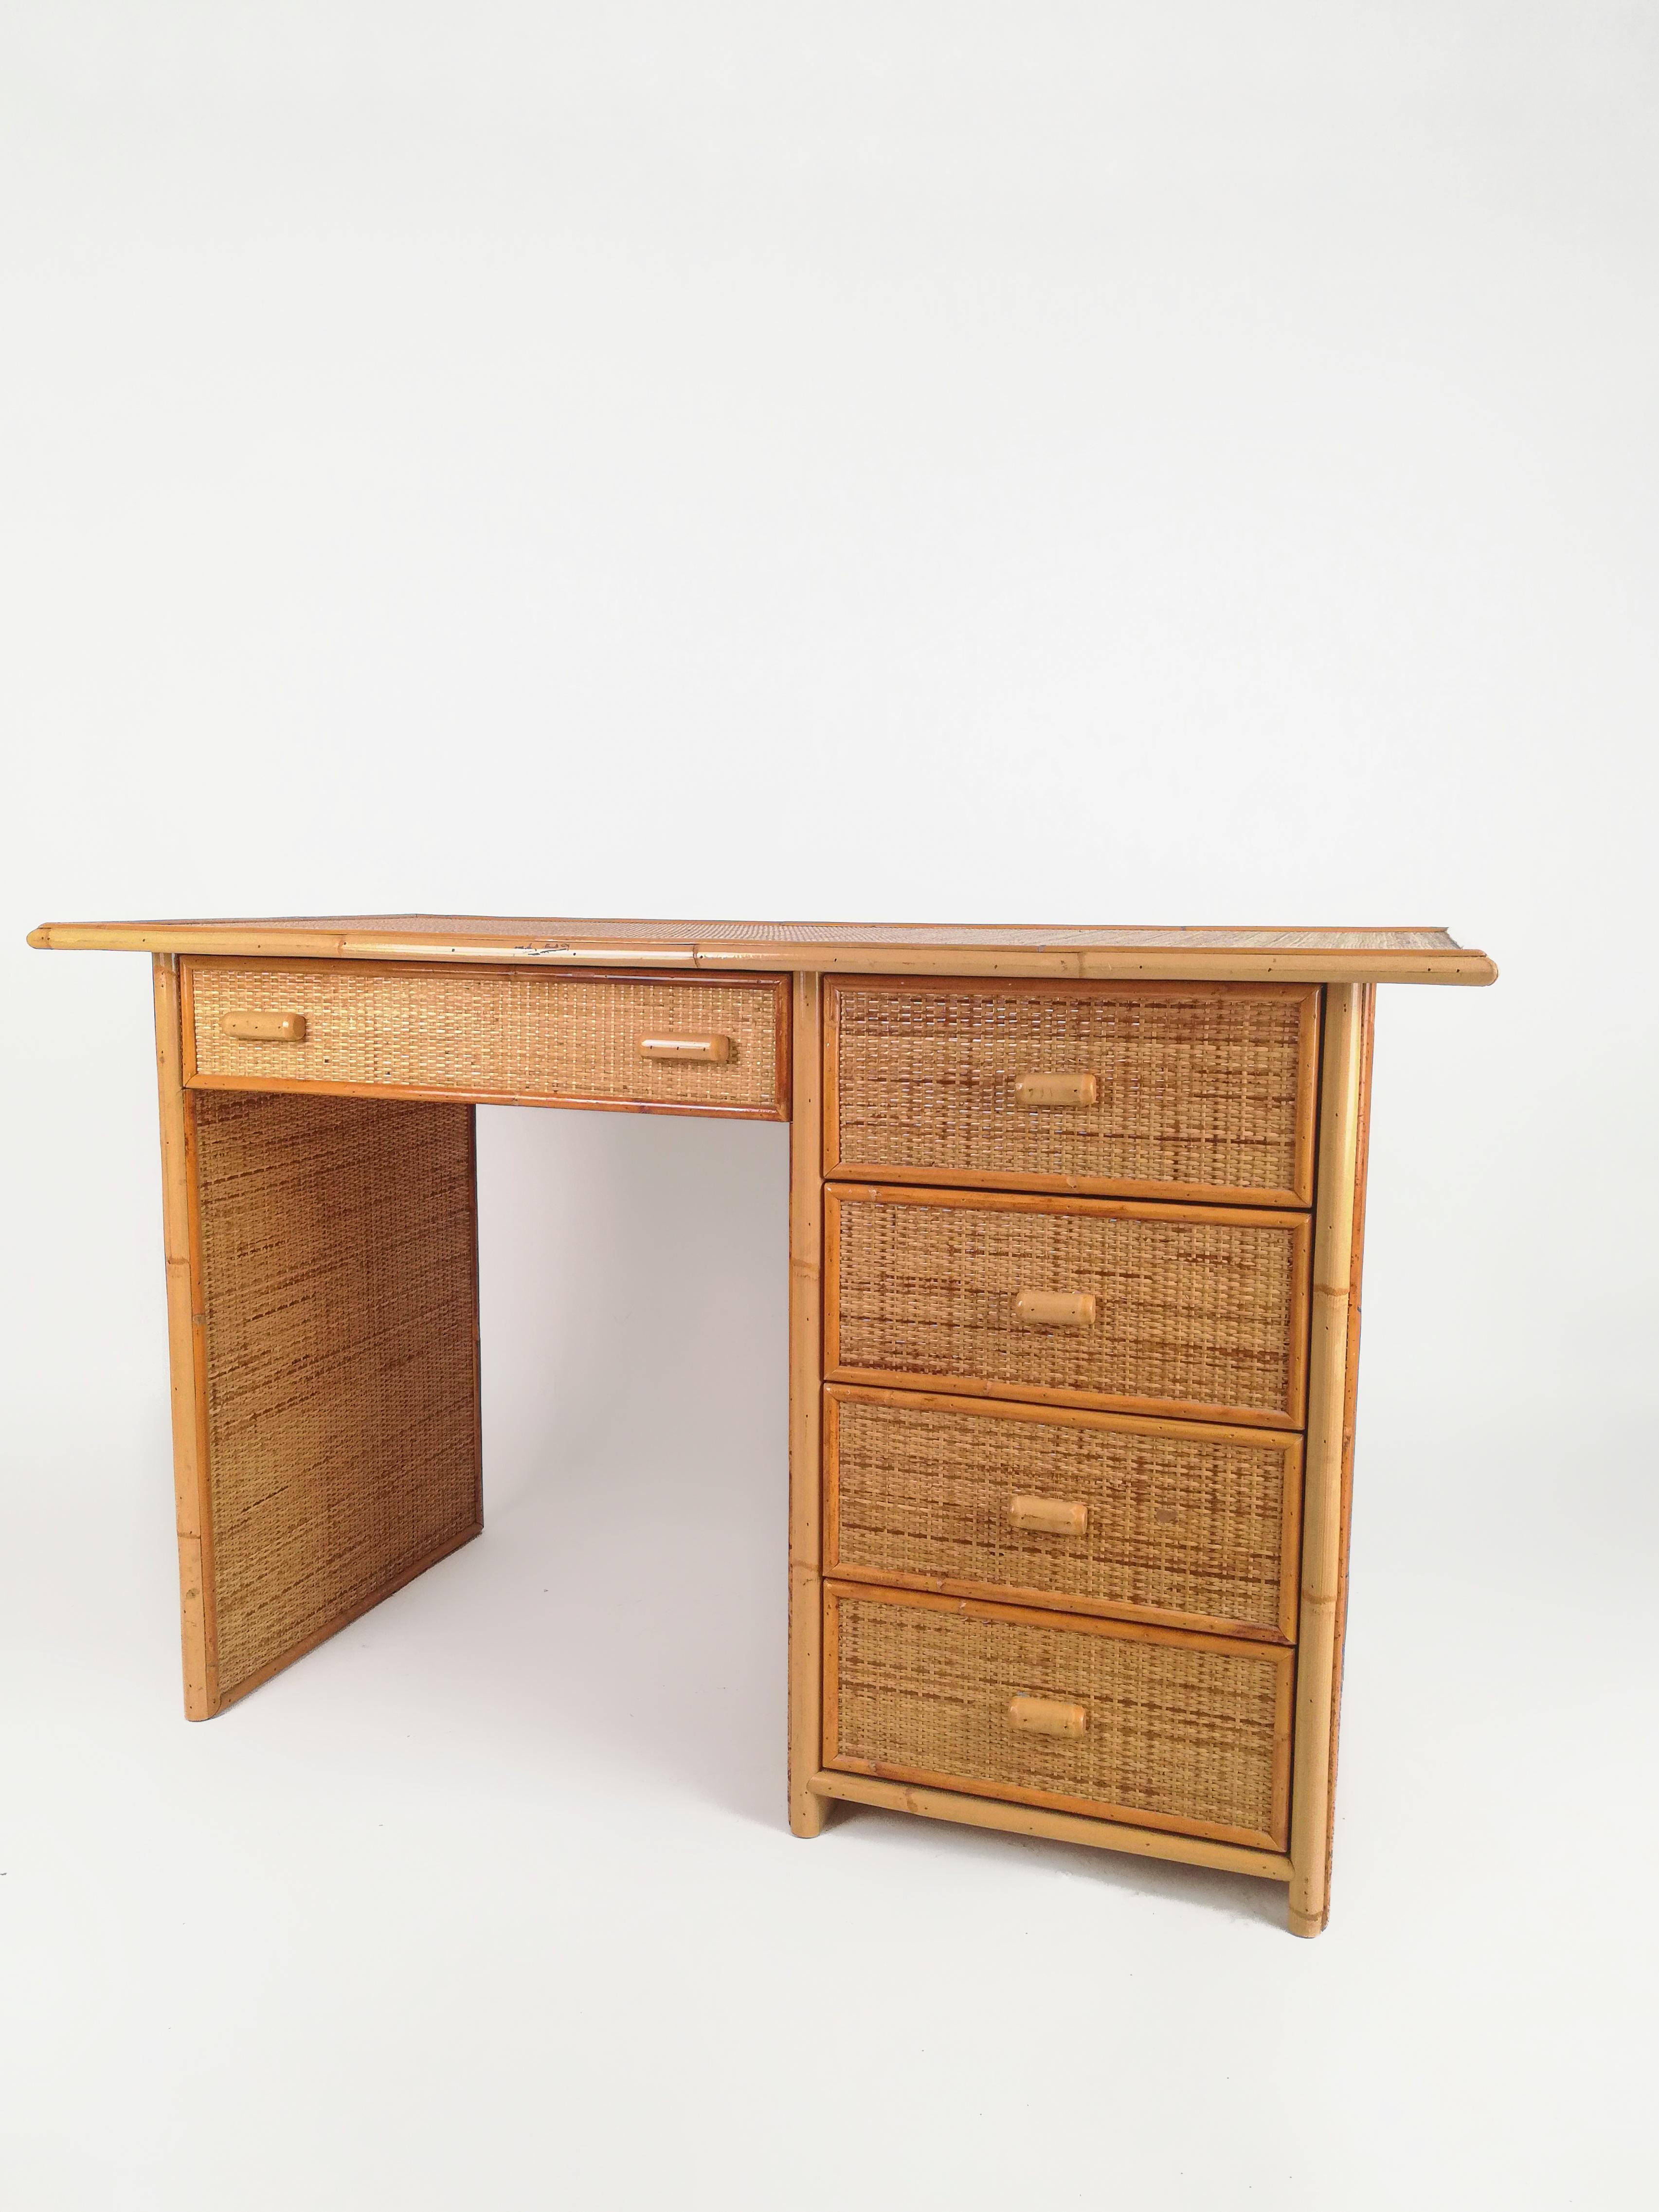 Vintage Italian Writing Desk with Drawers in Bamboo, Rattan and Plywood, 1970s For Sale 7